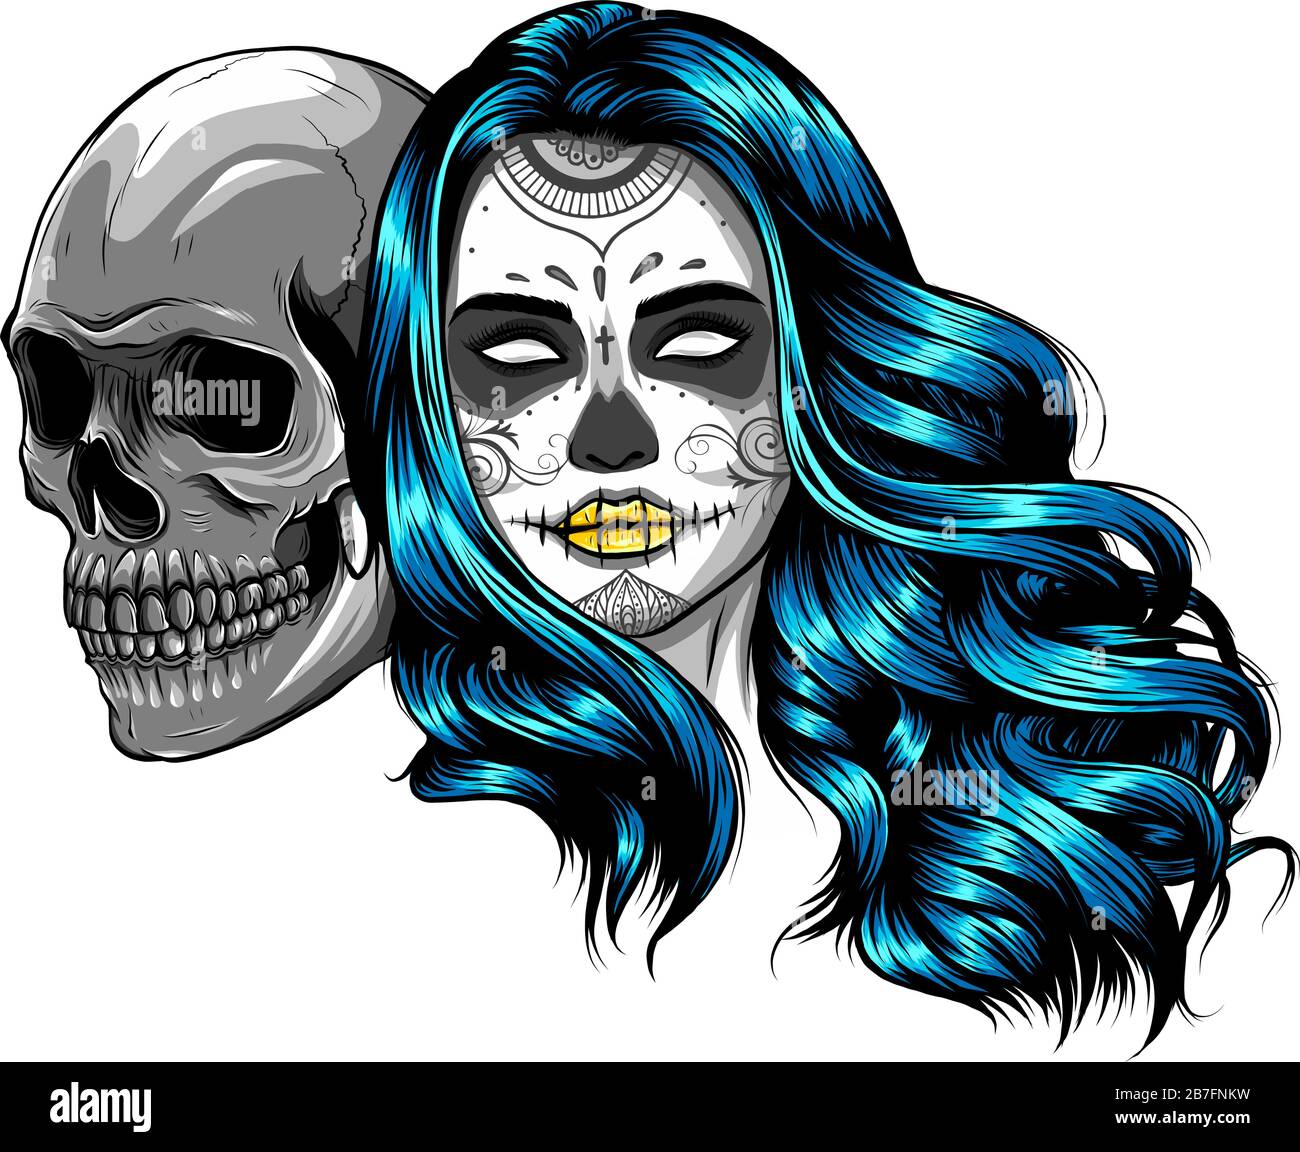 King and queen of death. Portrait of a skull with a crown. Stock Vector